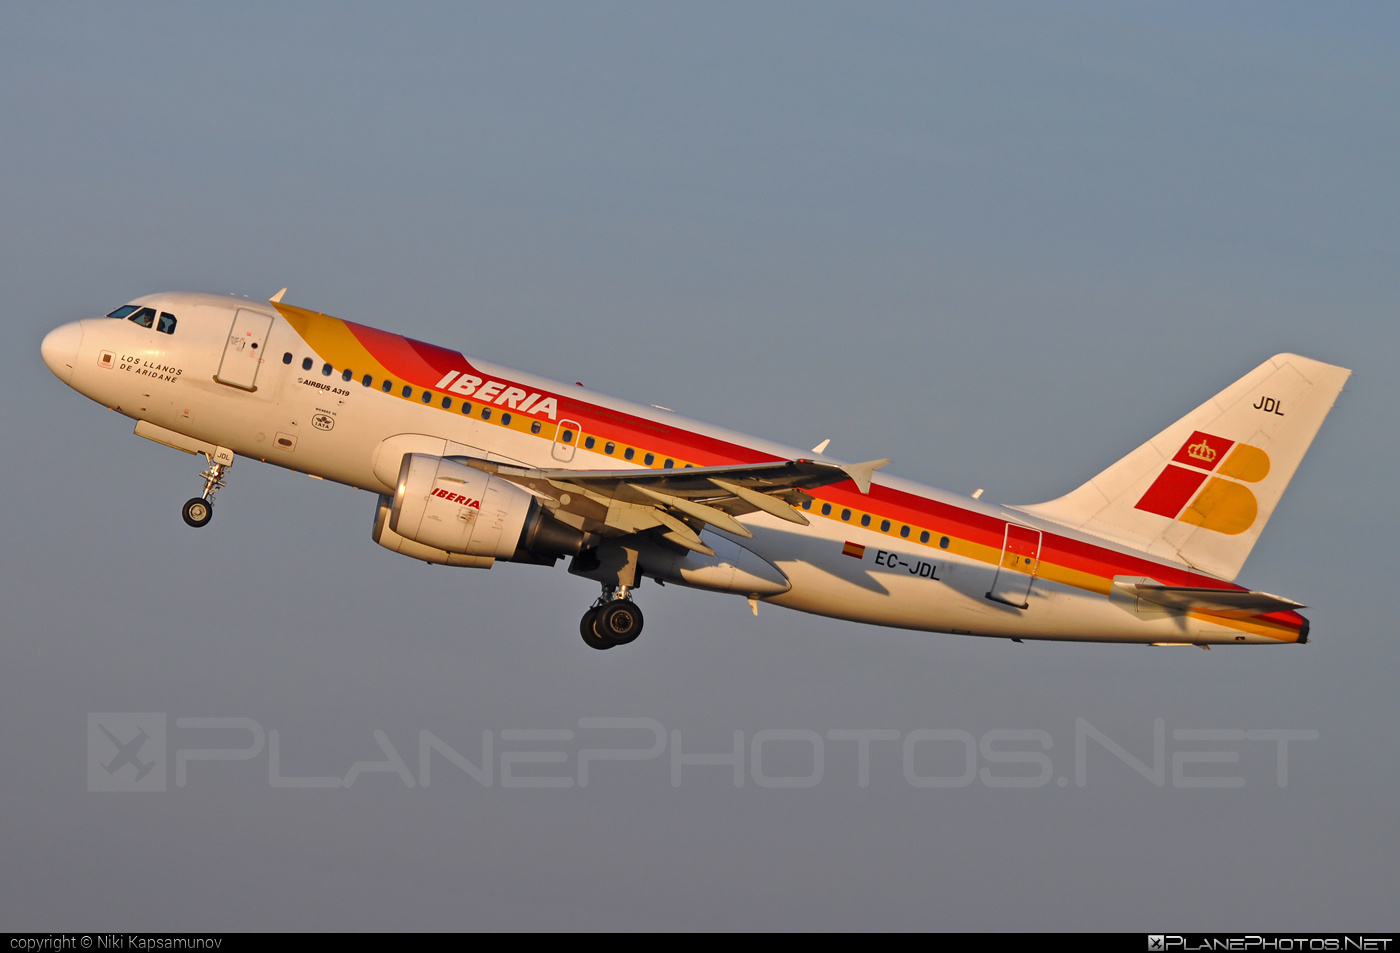 Airbus A319-111 - EC-JDL operated by Iberia #a319 #a320family #airbus #airbus319 #iberia